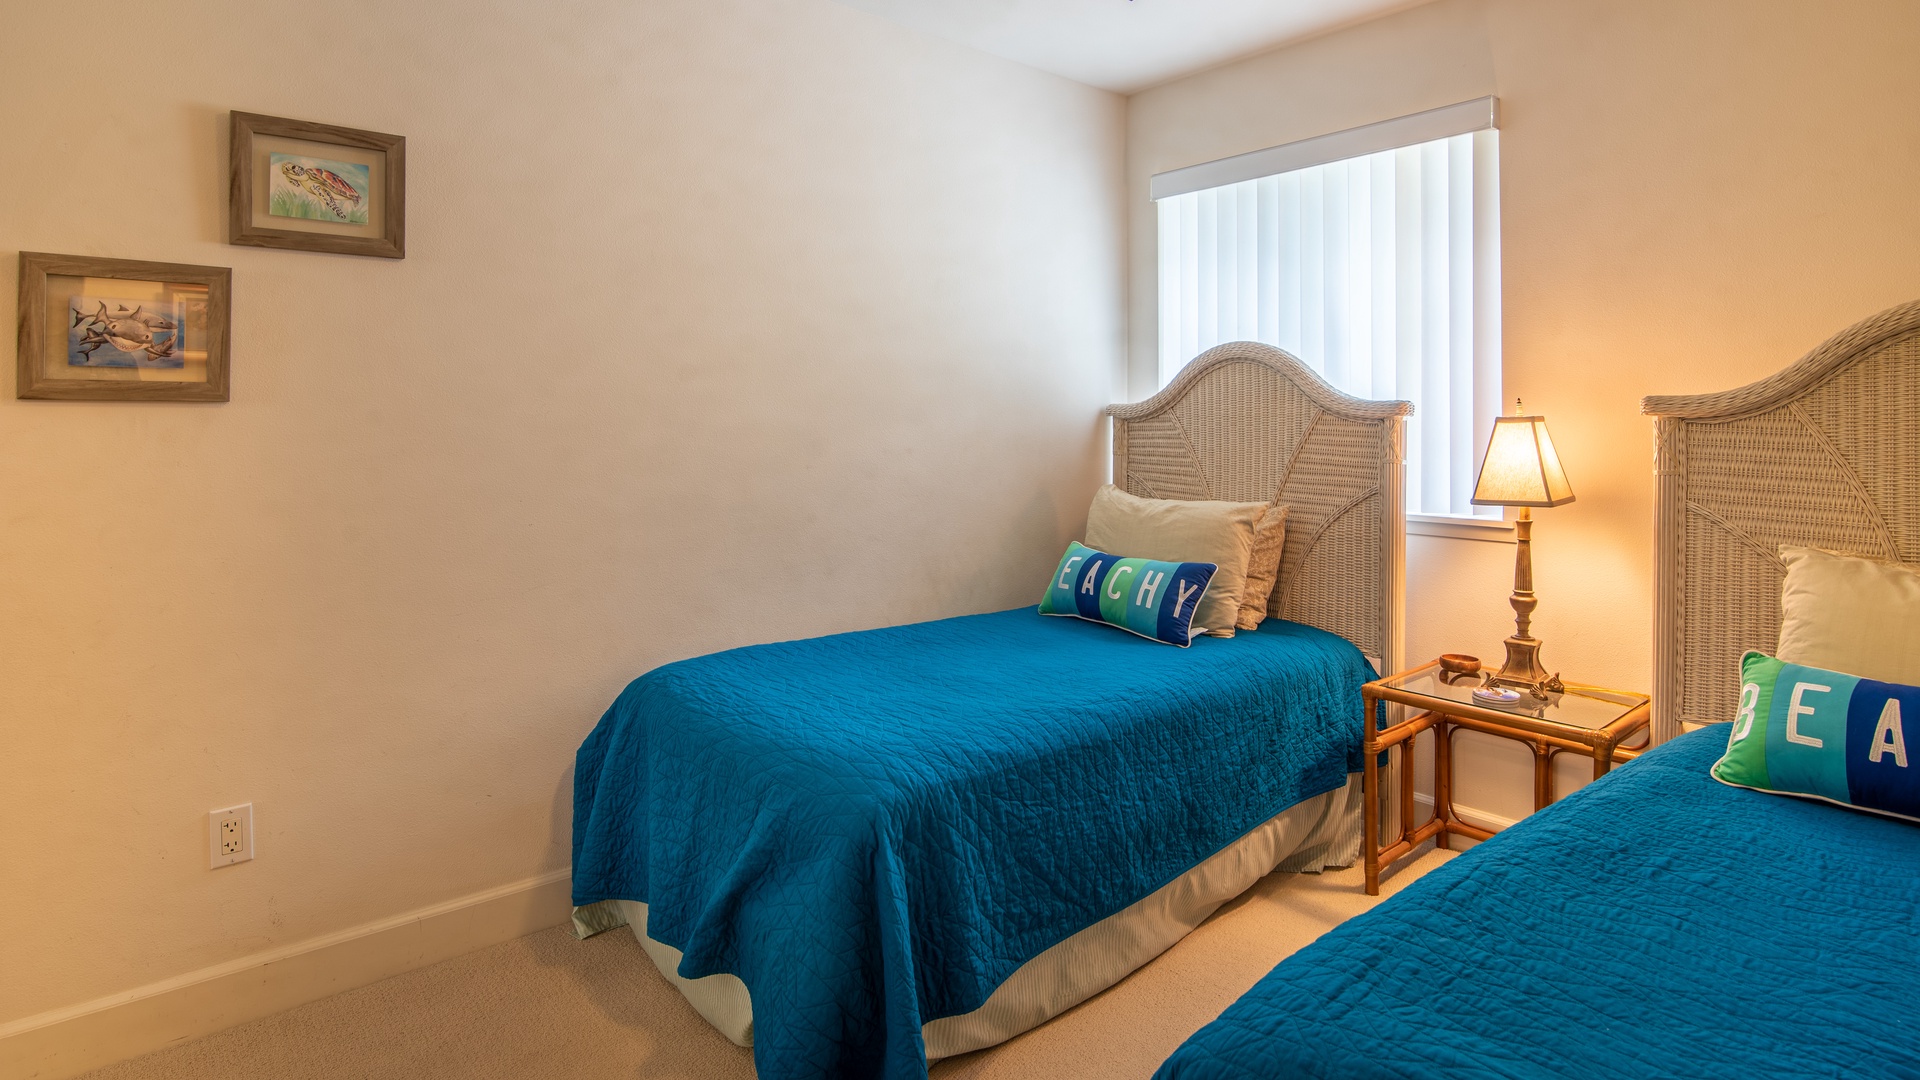 Kapolei Vacation Rentals, Hillside Villas 1538-2 - The third guest bedroom with twin beds and vibrant colors.